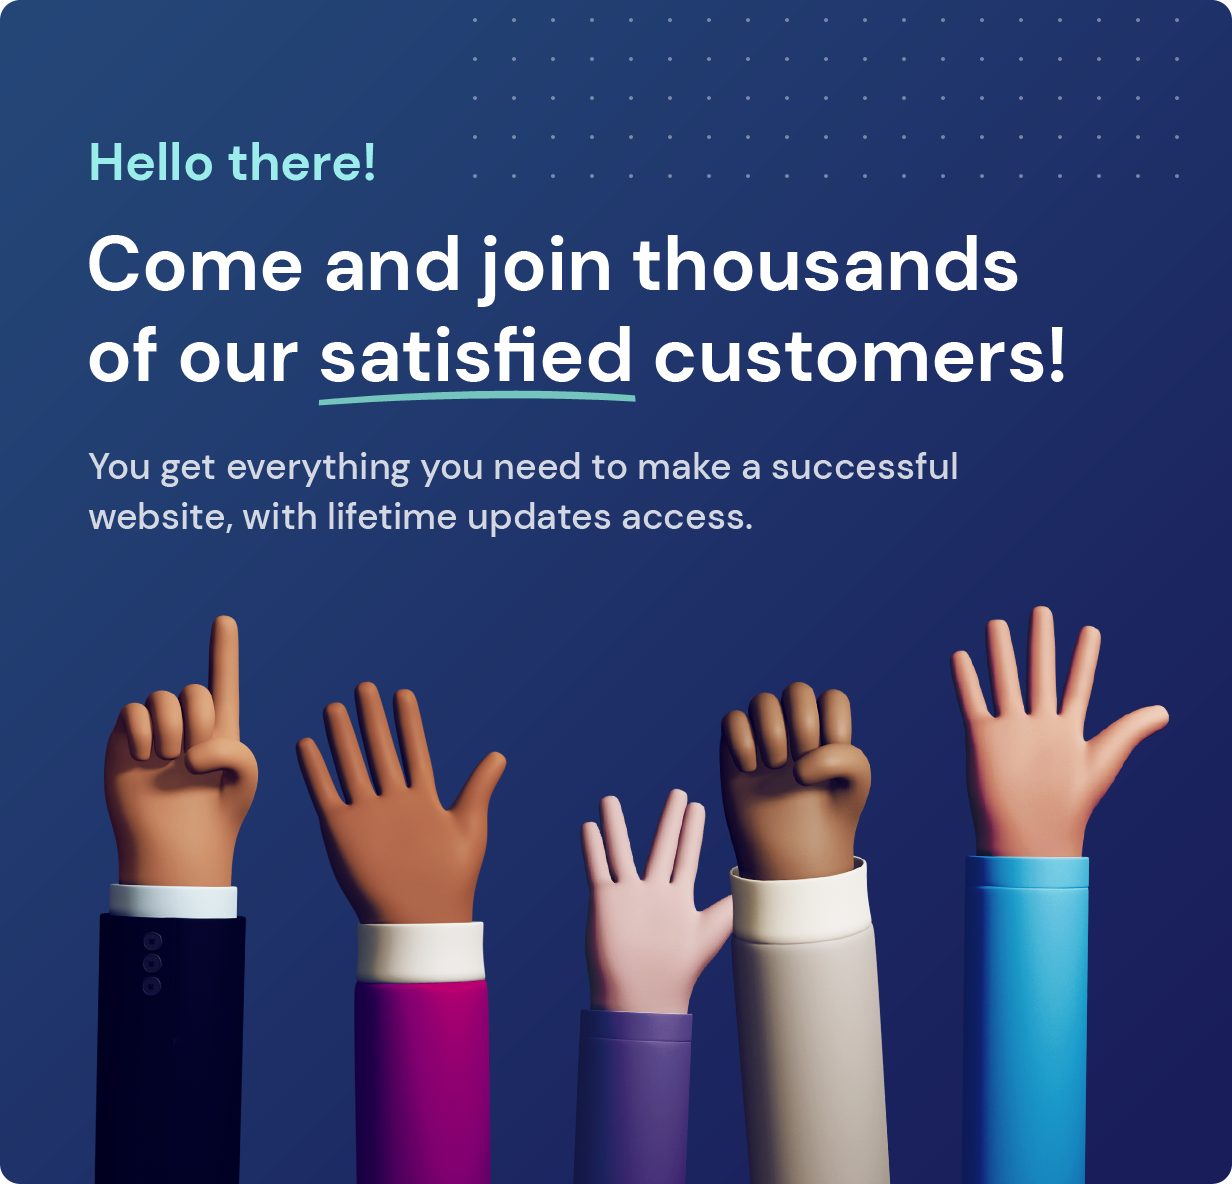 Join thousands of our satisfied customers!